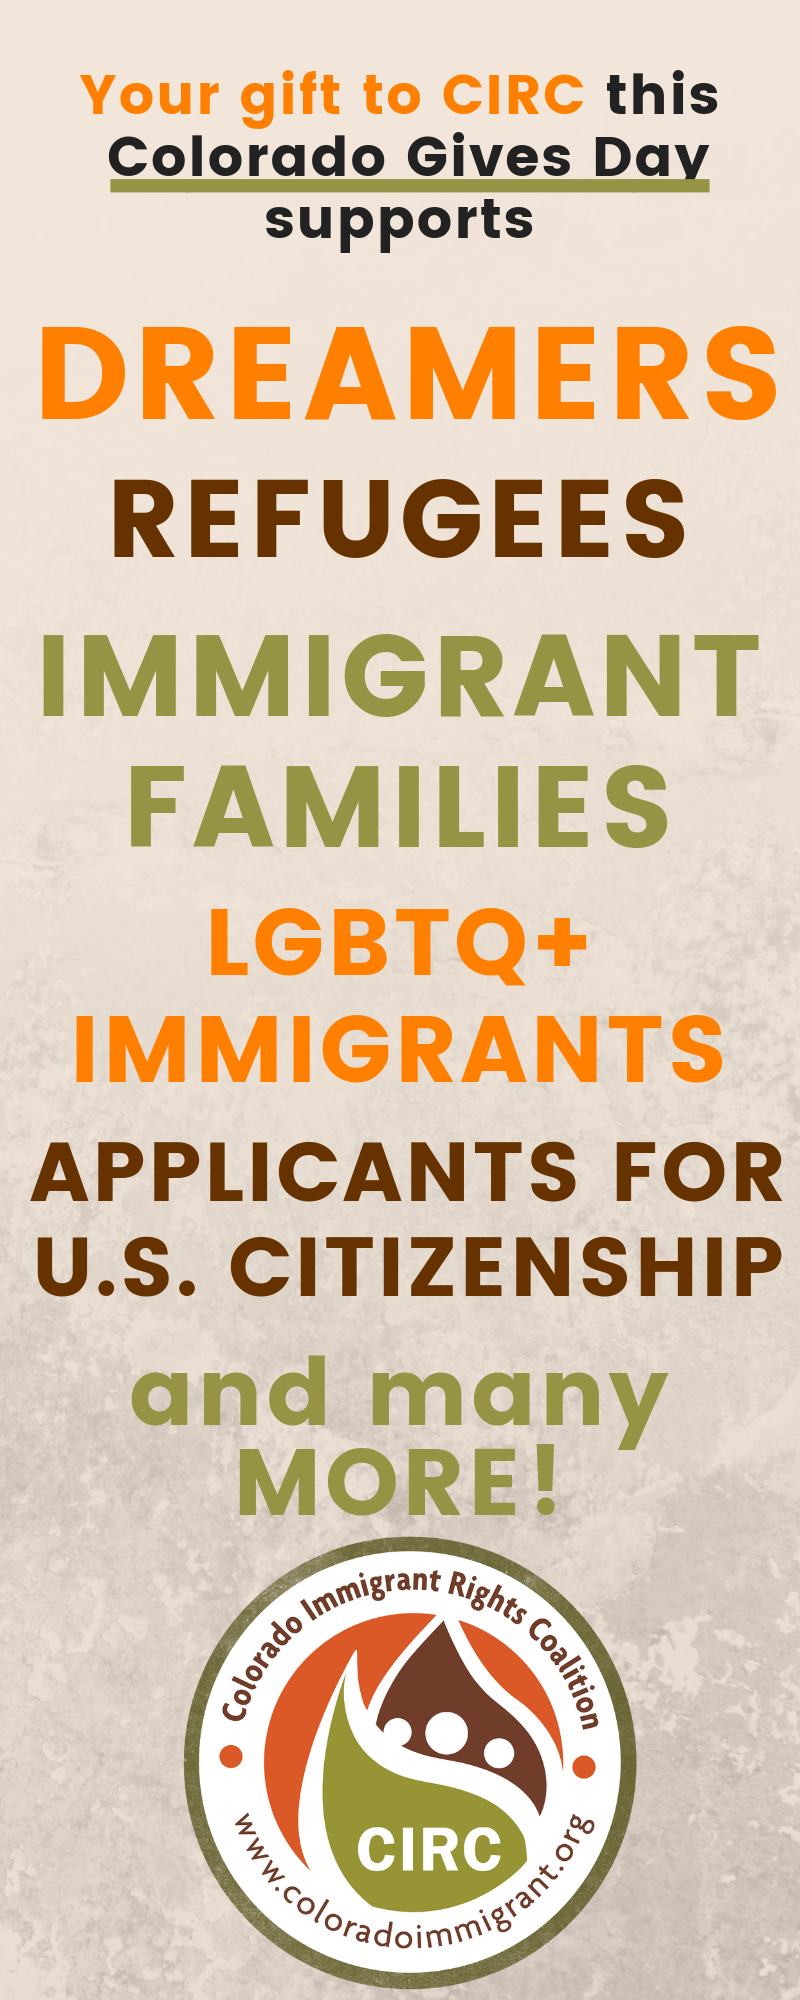 Your gift on Colorado Gives Day supports: DREAMERS, REFUGEES, IMMIGRANT FAMILIES, LGBTQ+ IMMIGRANTS, APPLICANTS FOR U.S. CITIZENSHIP, & many more!